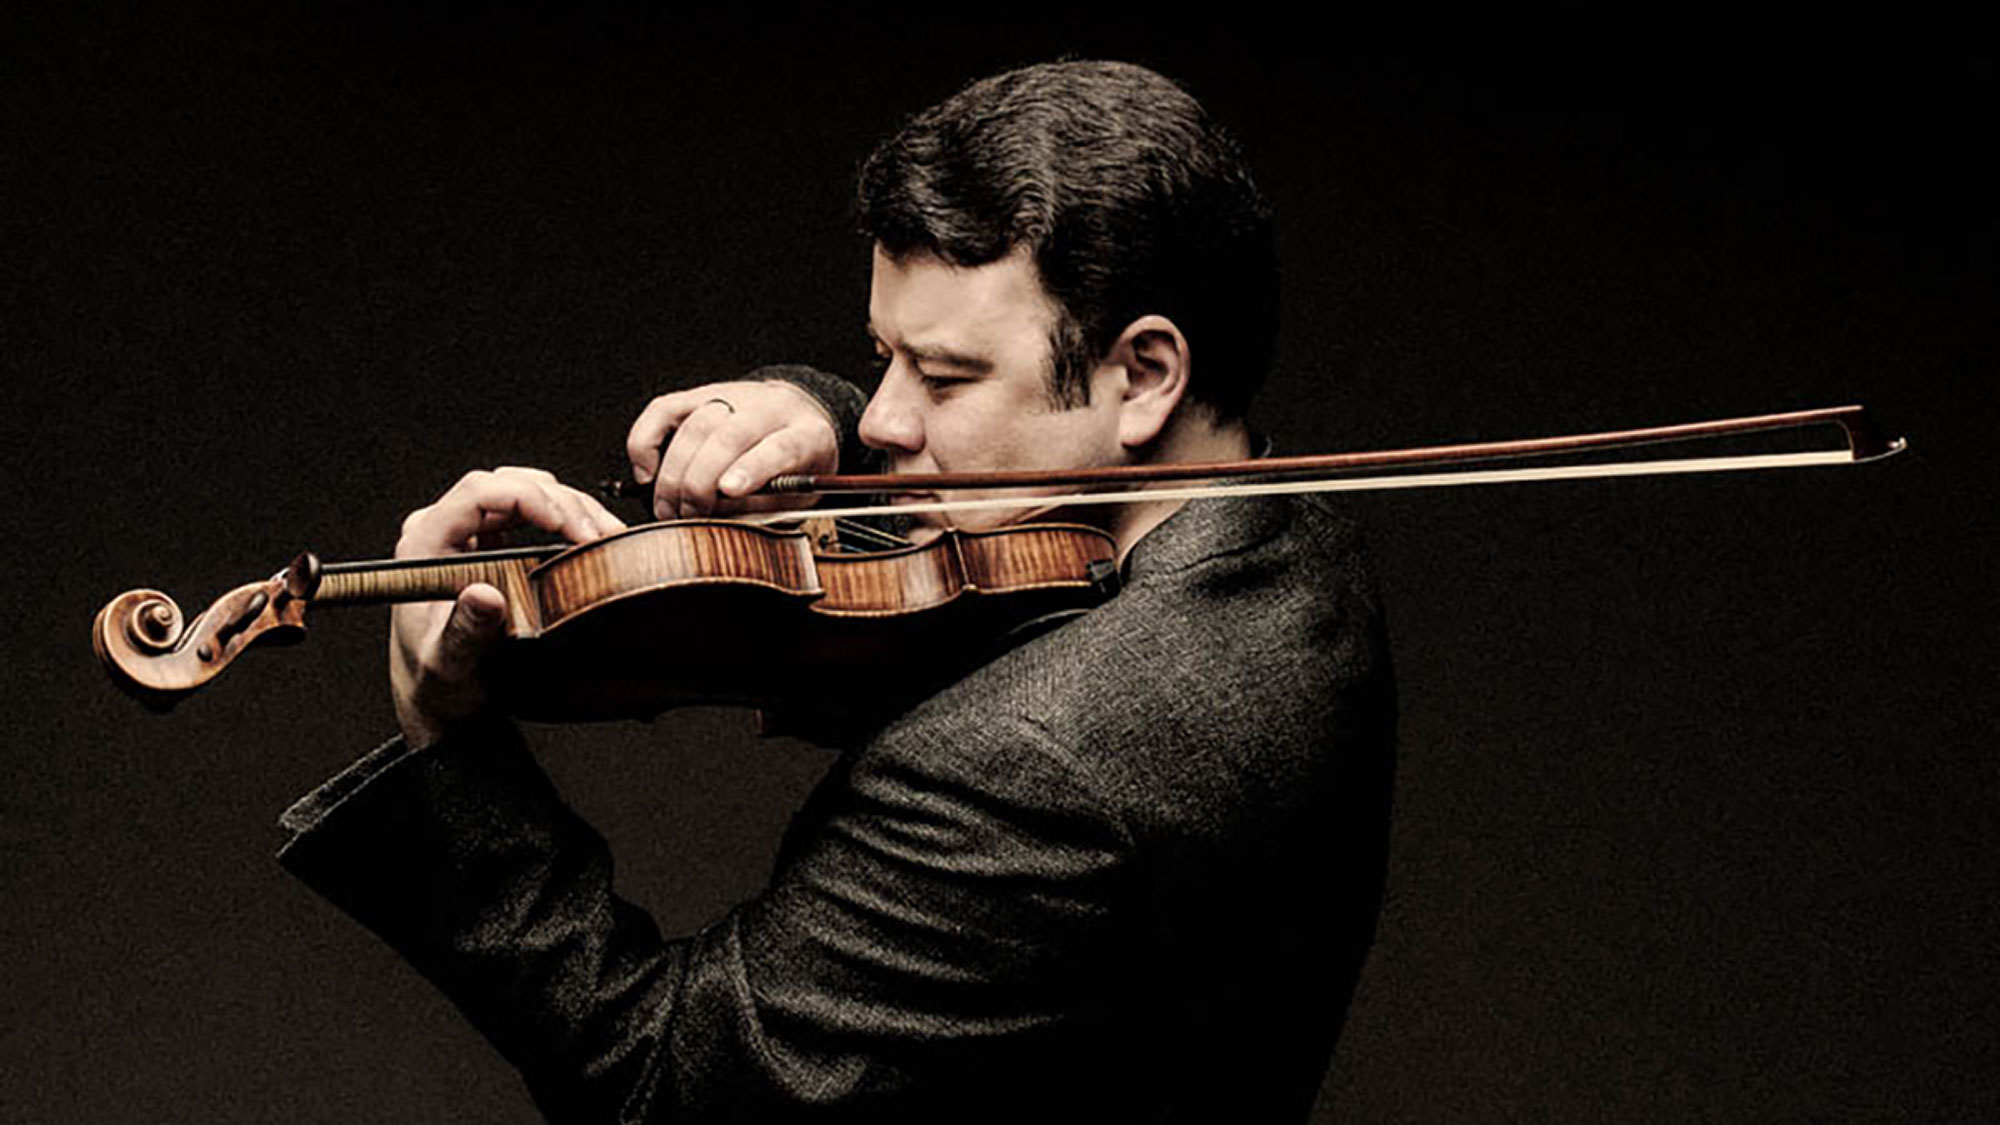 The Four Seasons with Orpheus Chamber Orchestra and Vadin Gluzman at Ravinia Festival